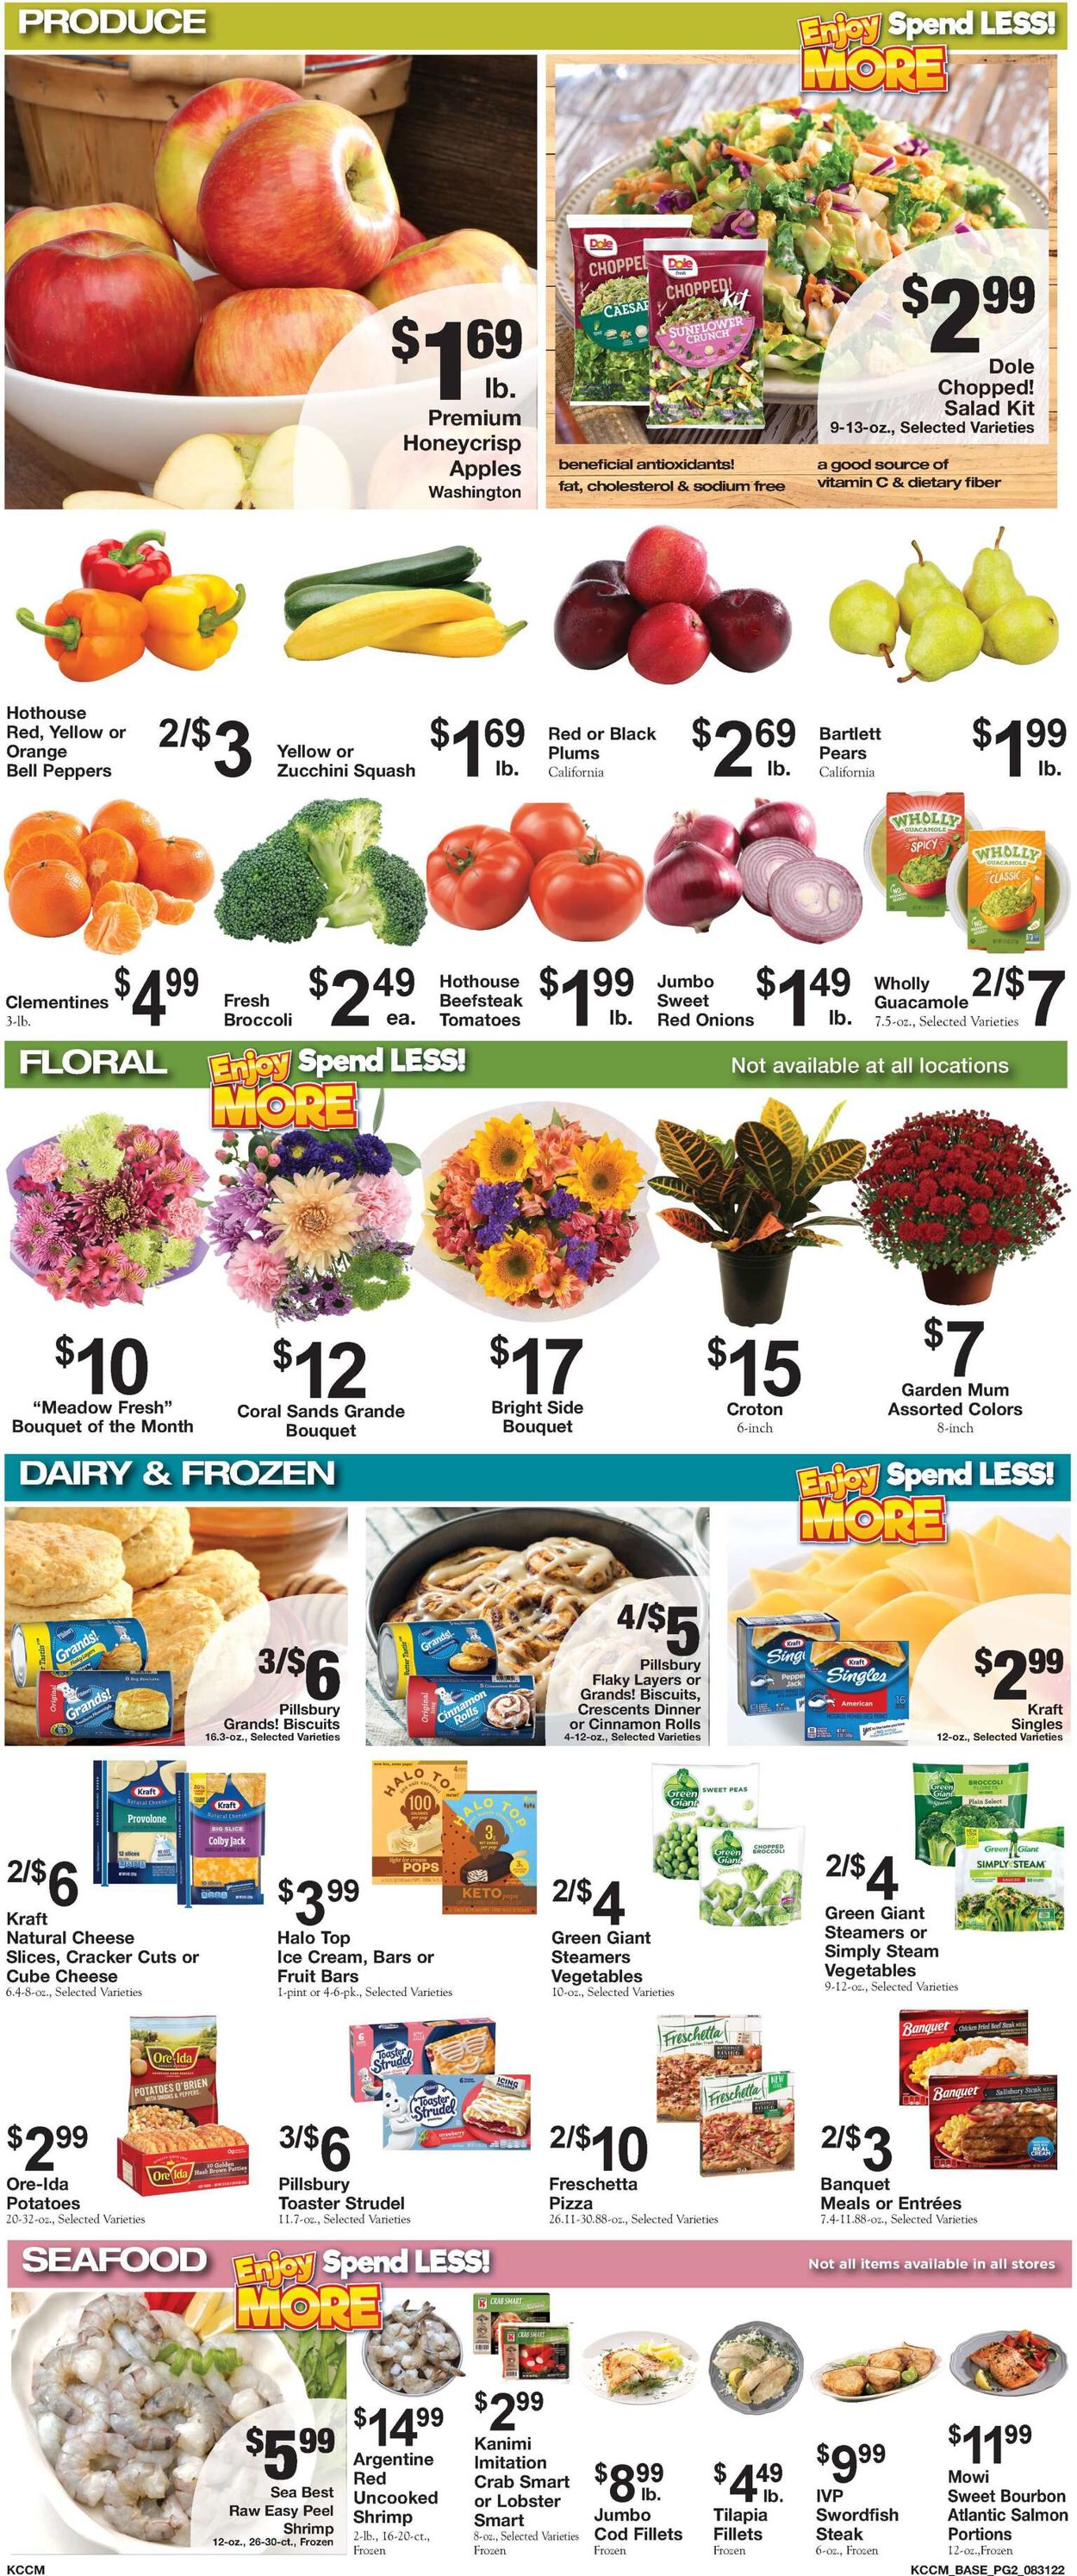 Country Mart Ad from 08/30/2022